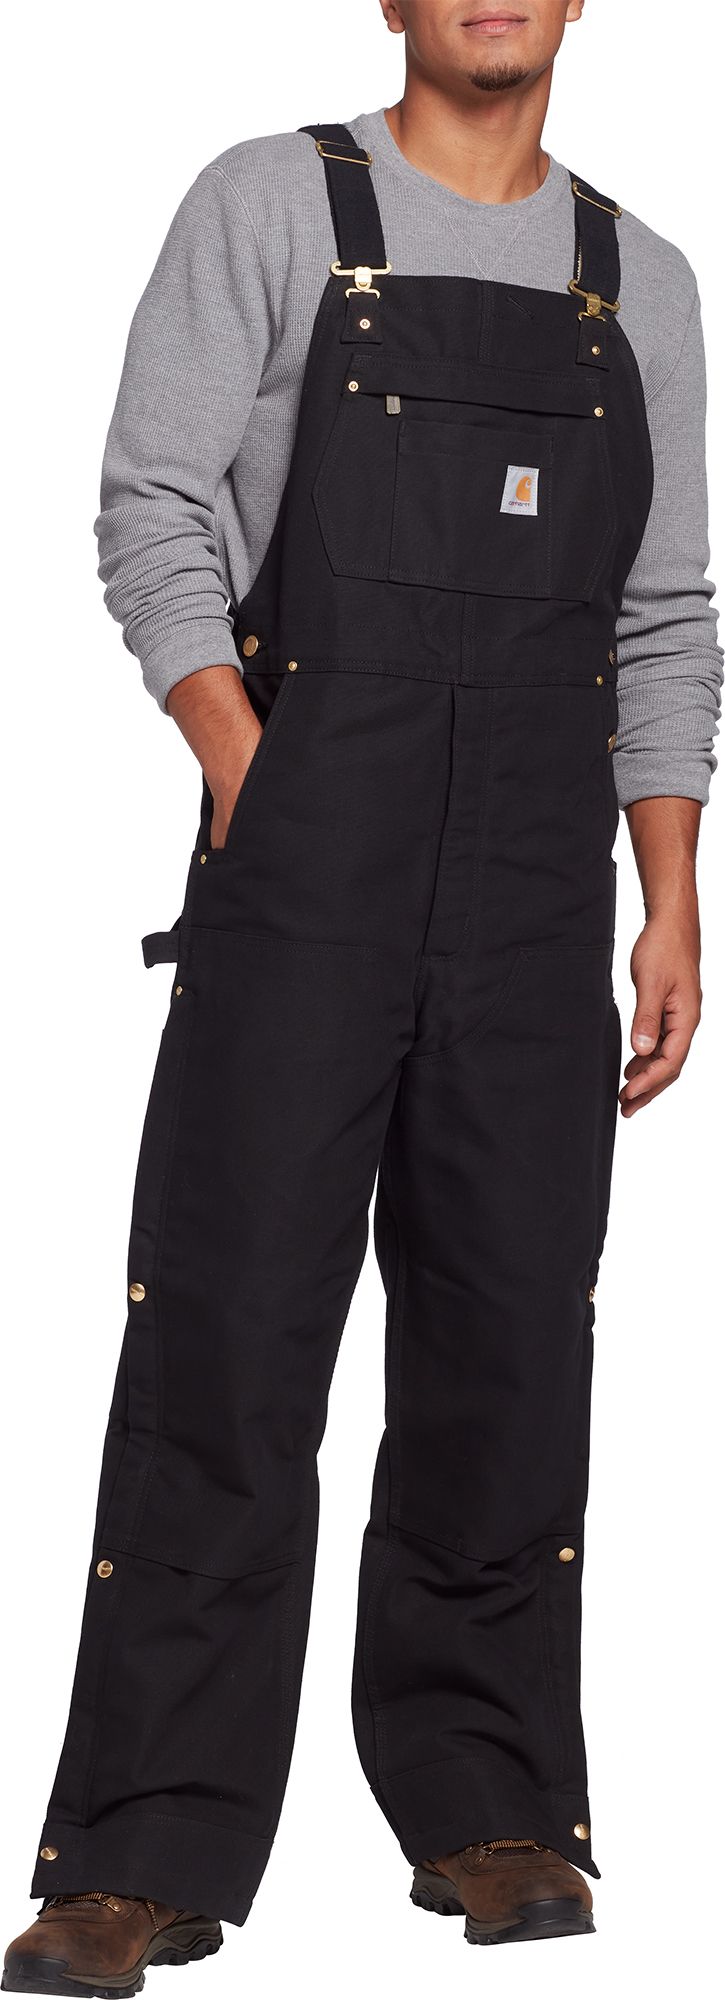 Photos - Ski Wear Carhartt Men's Loose Fit Firm Duck Insulated Bib Overalls, Large, Black 21 